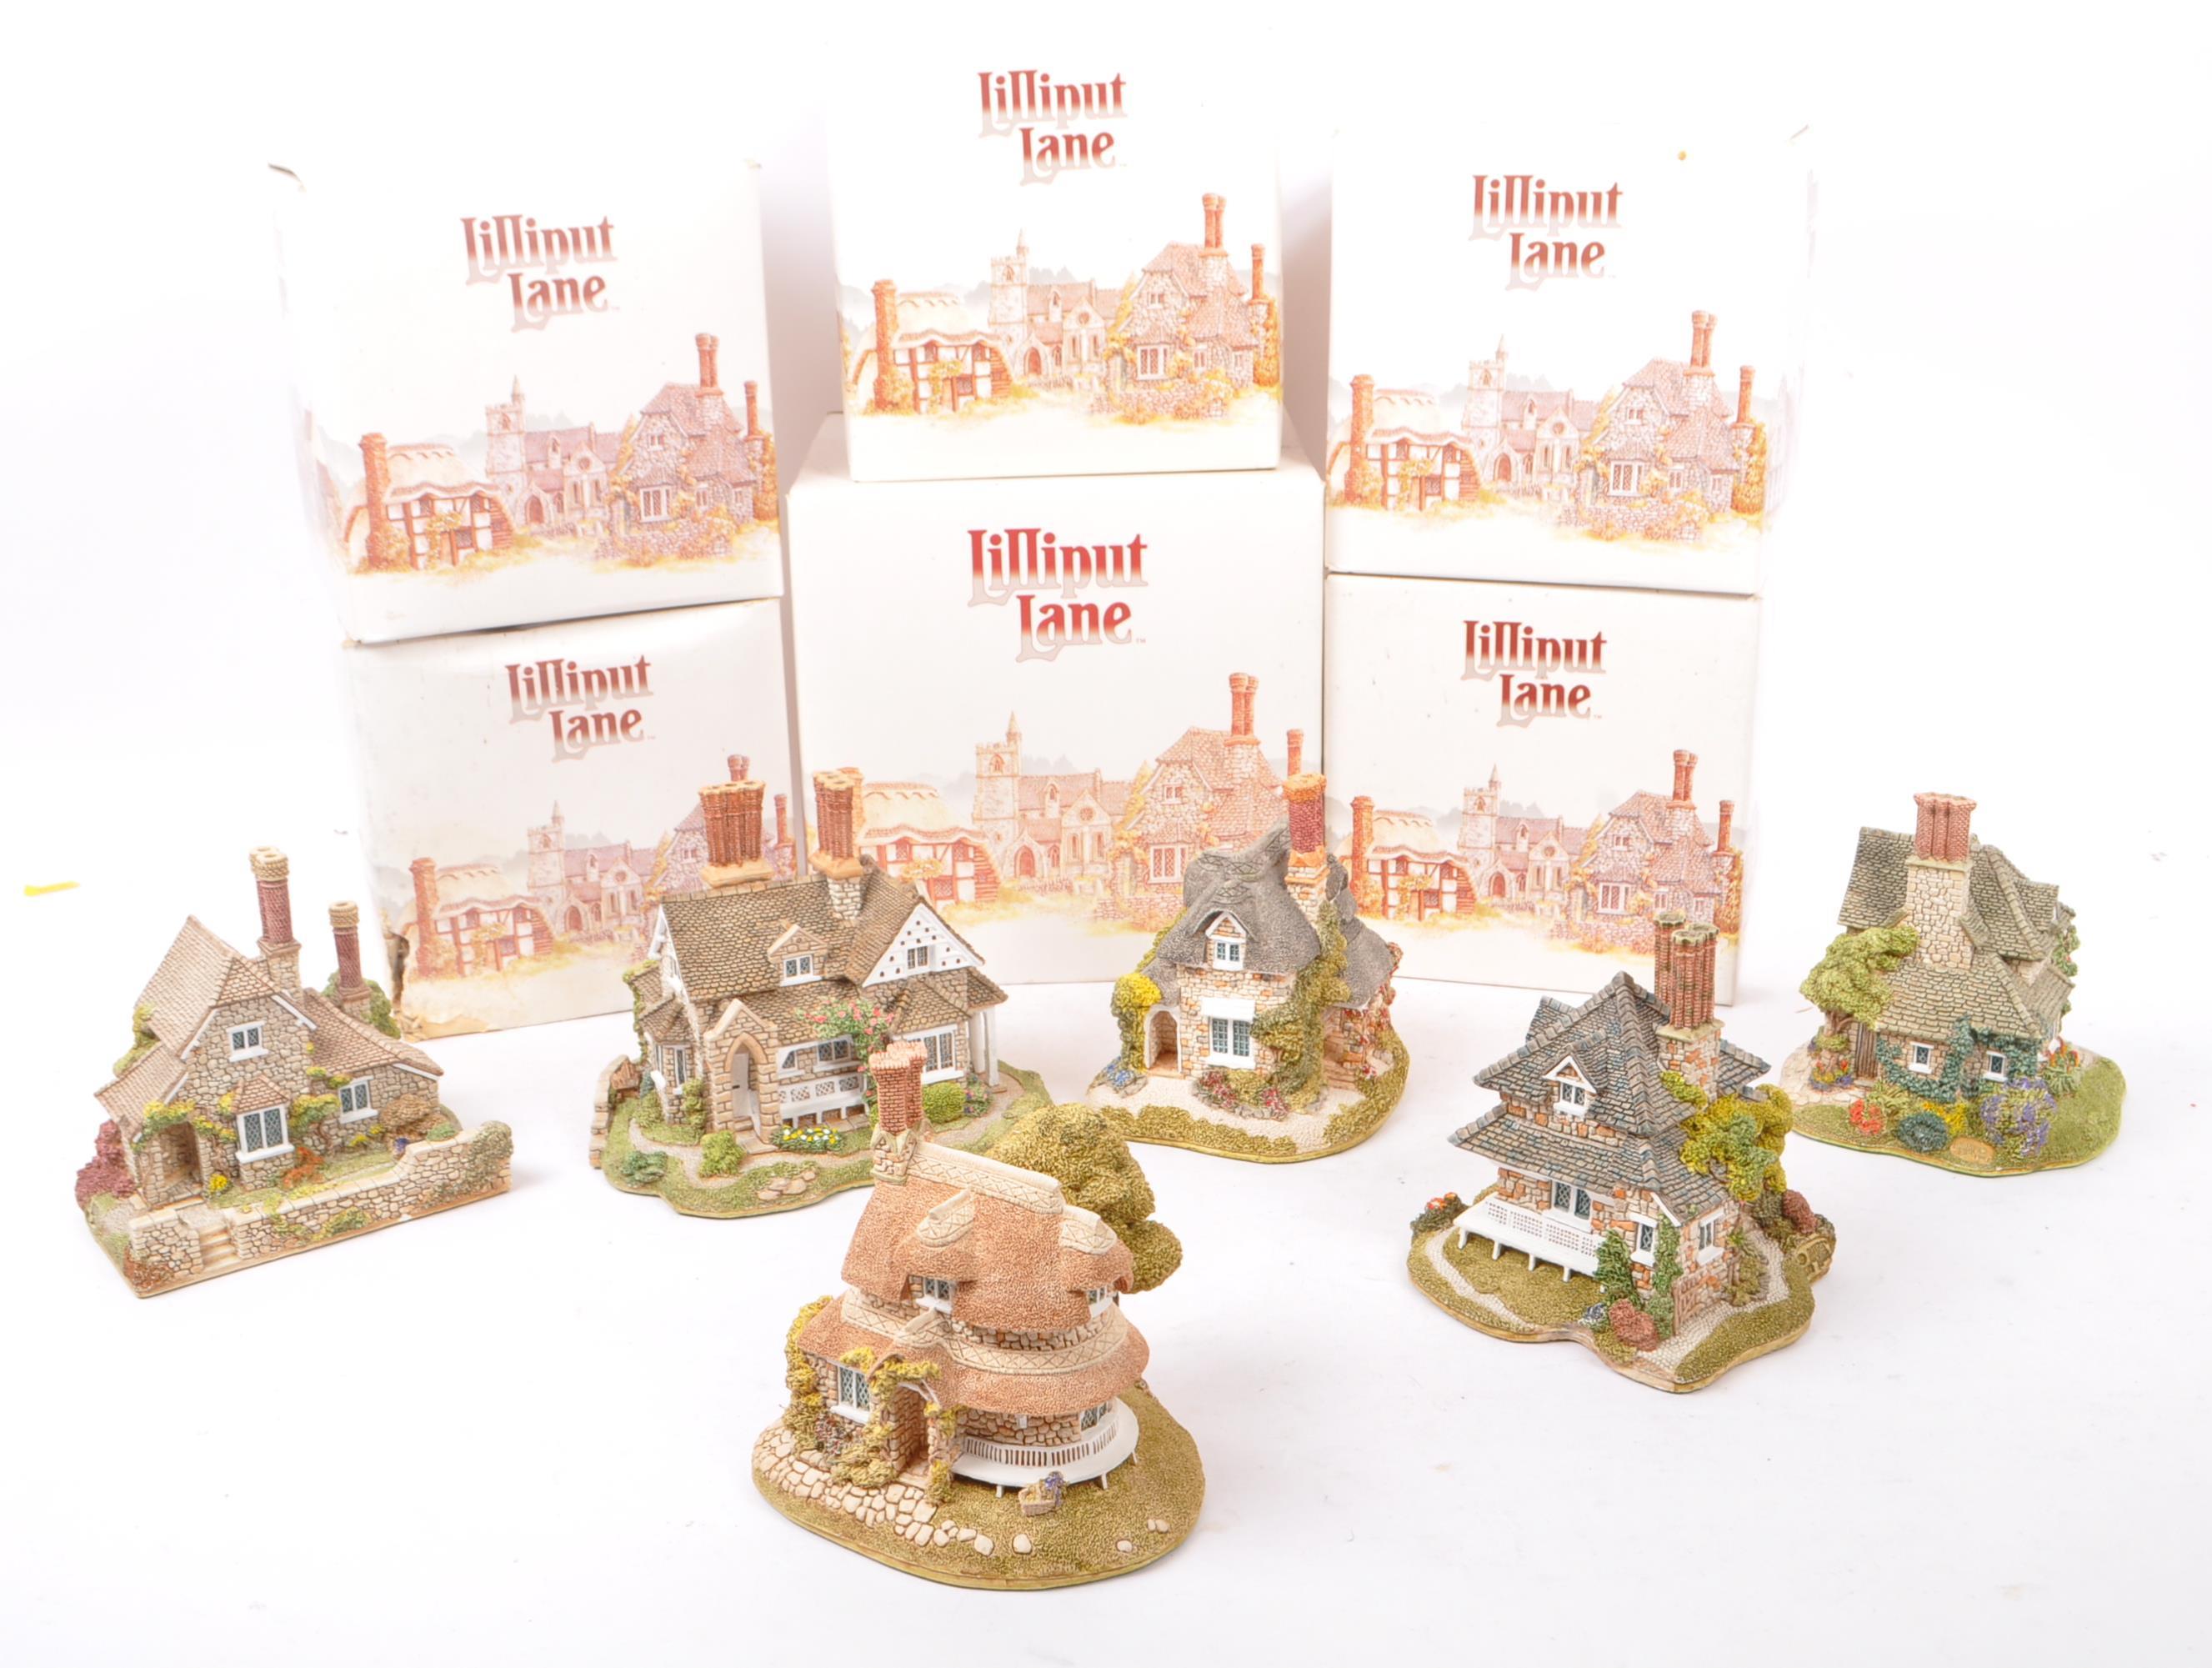 LILLIPUT LANE - COLLECTION OF HOUSE / COTTAGE RESIN FIGURINES